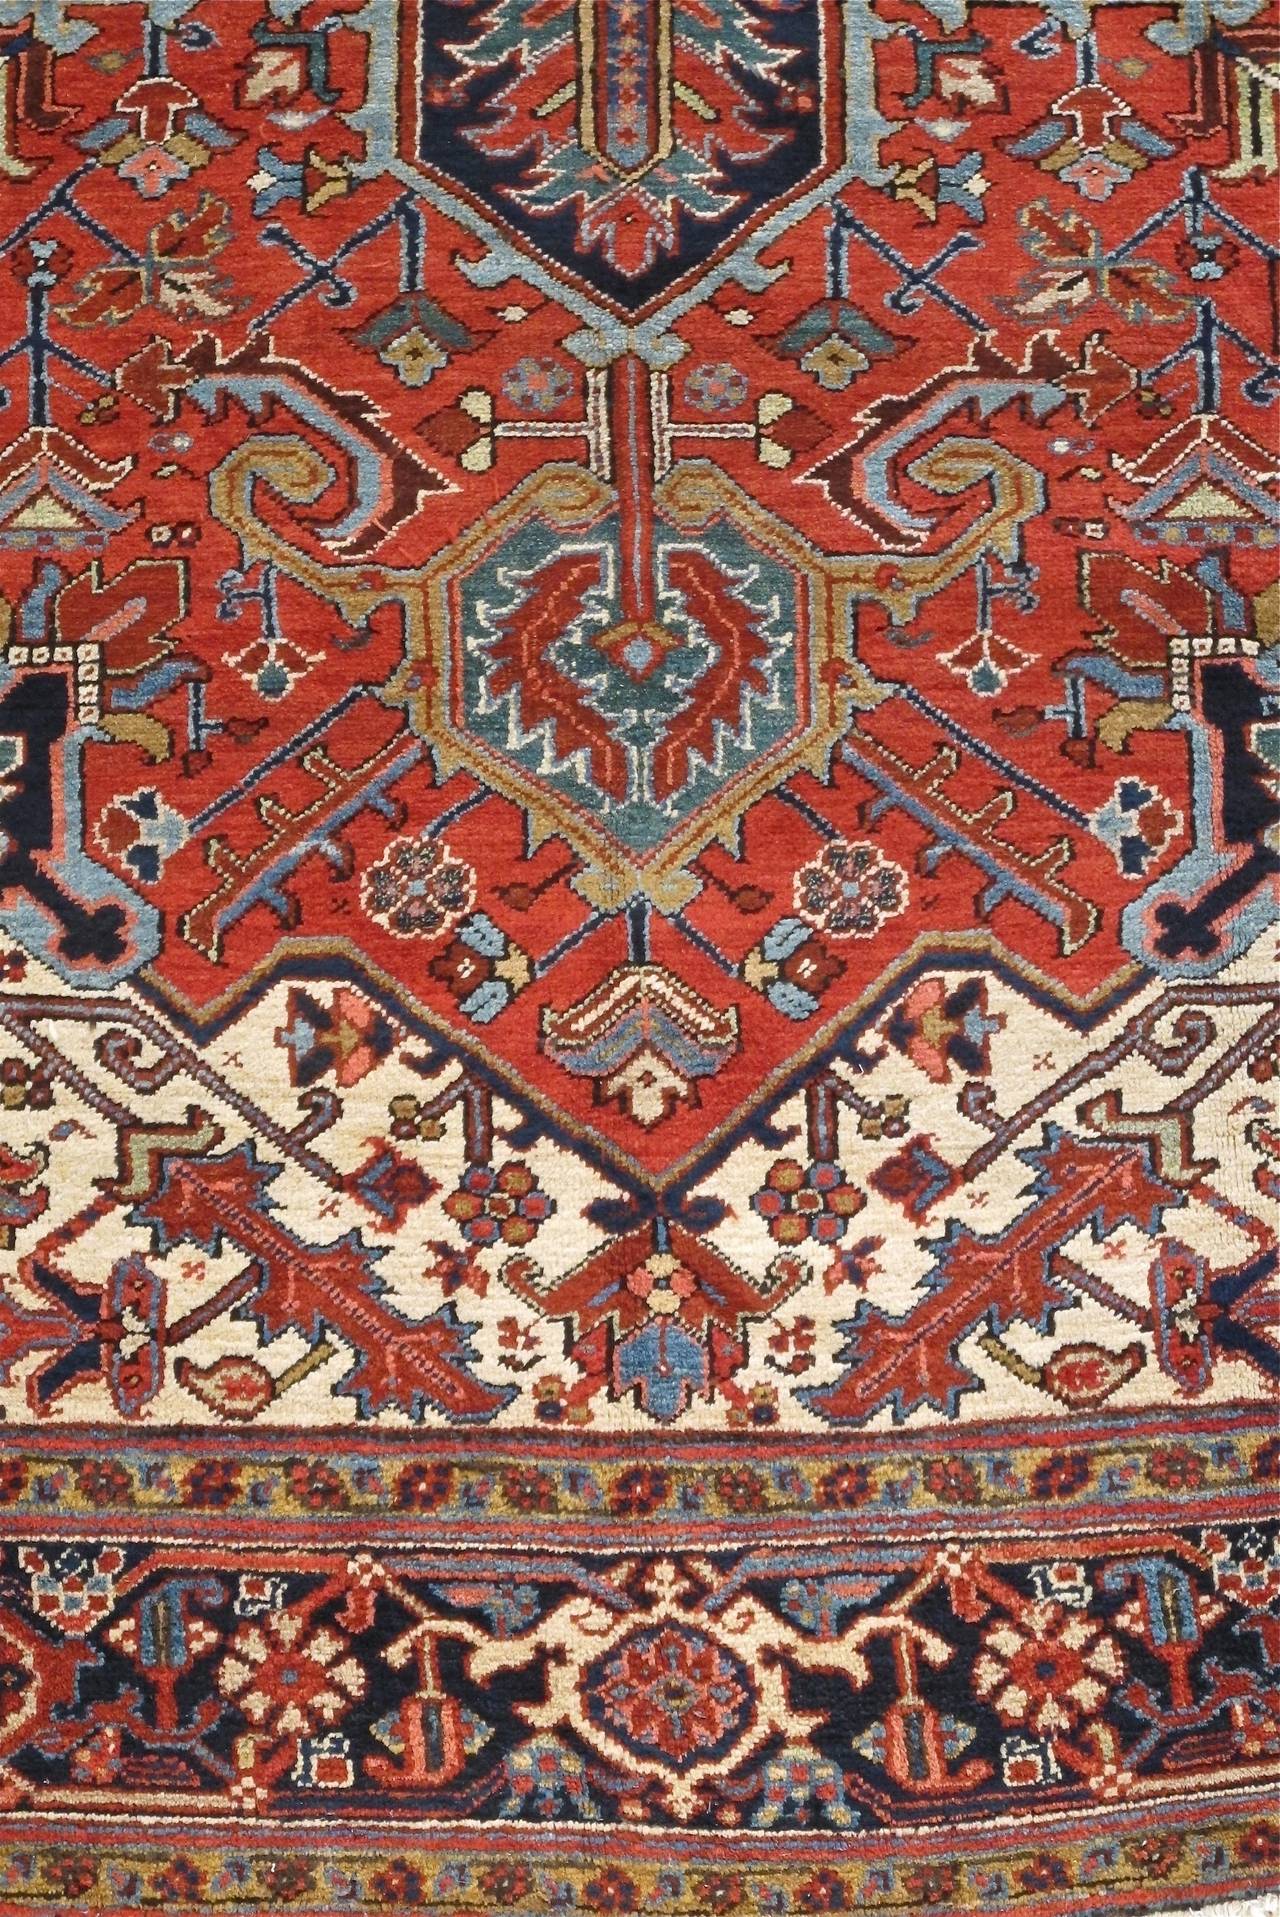 Colorful early 20th century Persian Heriz.